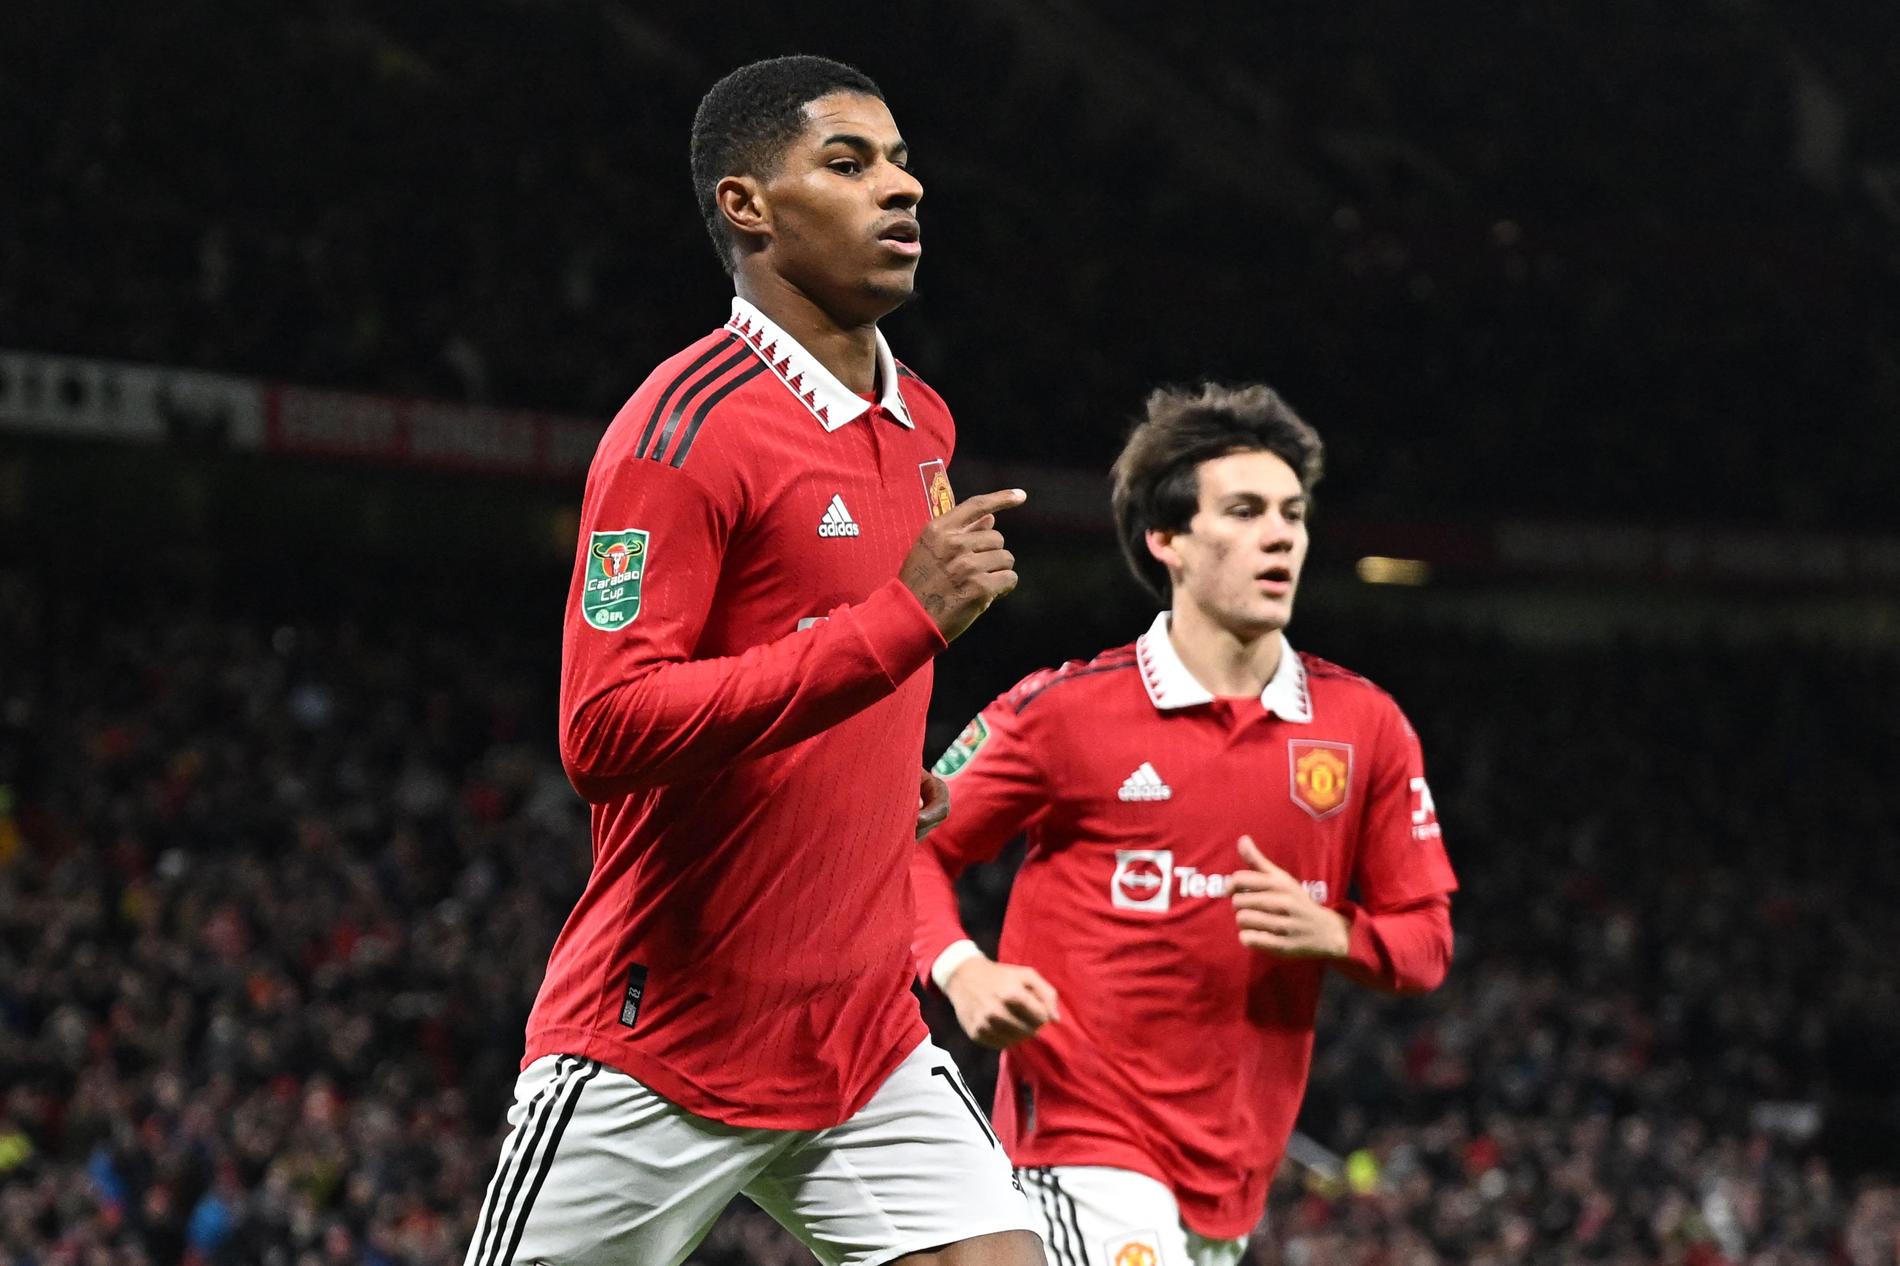 Rashford touched on Rooney’s record in cup wins: – He’s in good shape